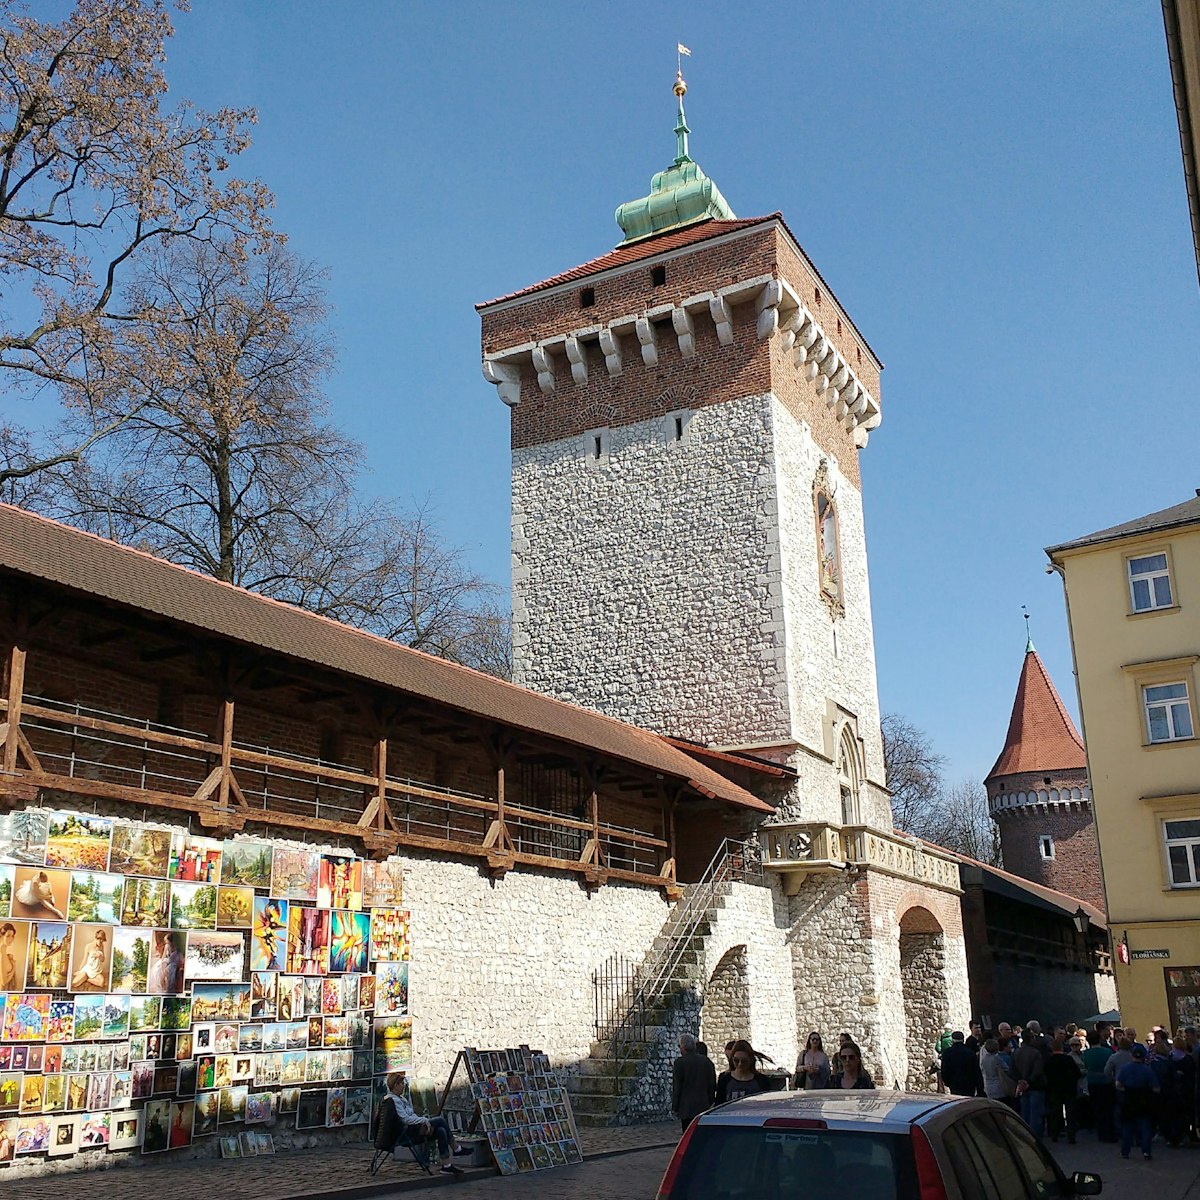 The Florian Gate is the only original fortress gate remaining of the original eight